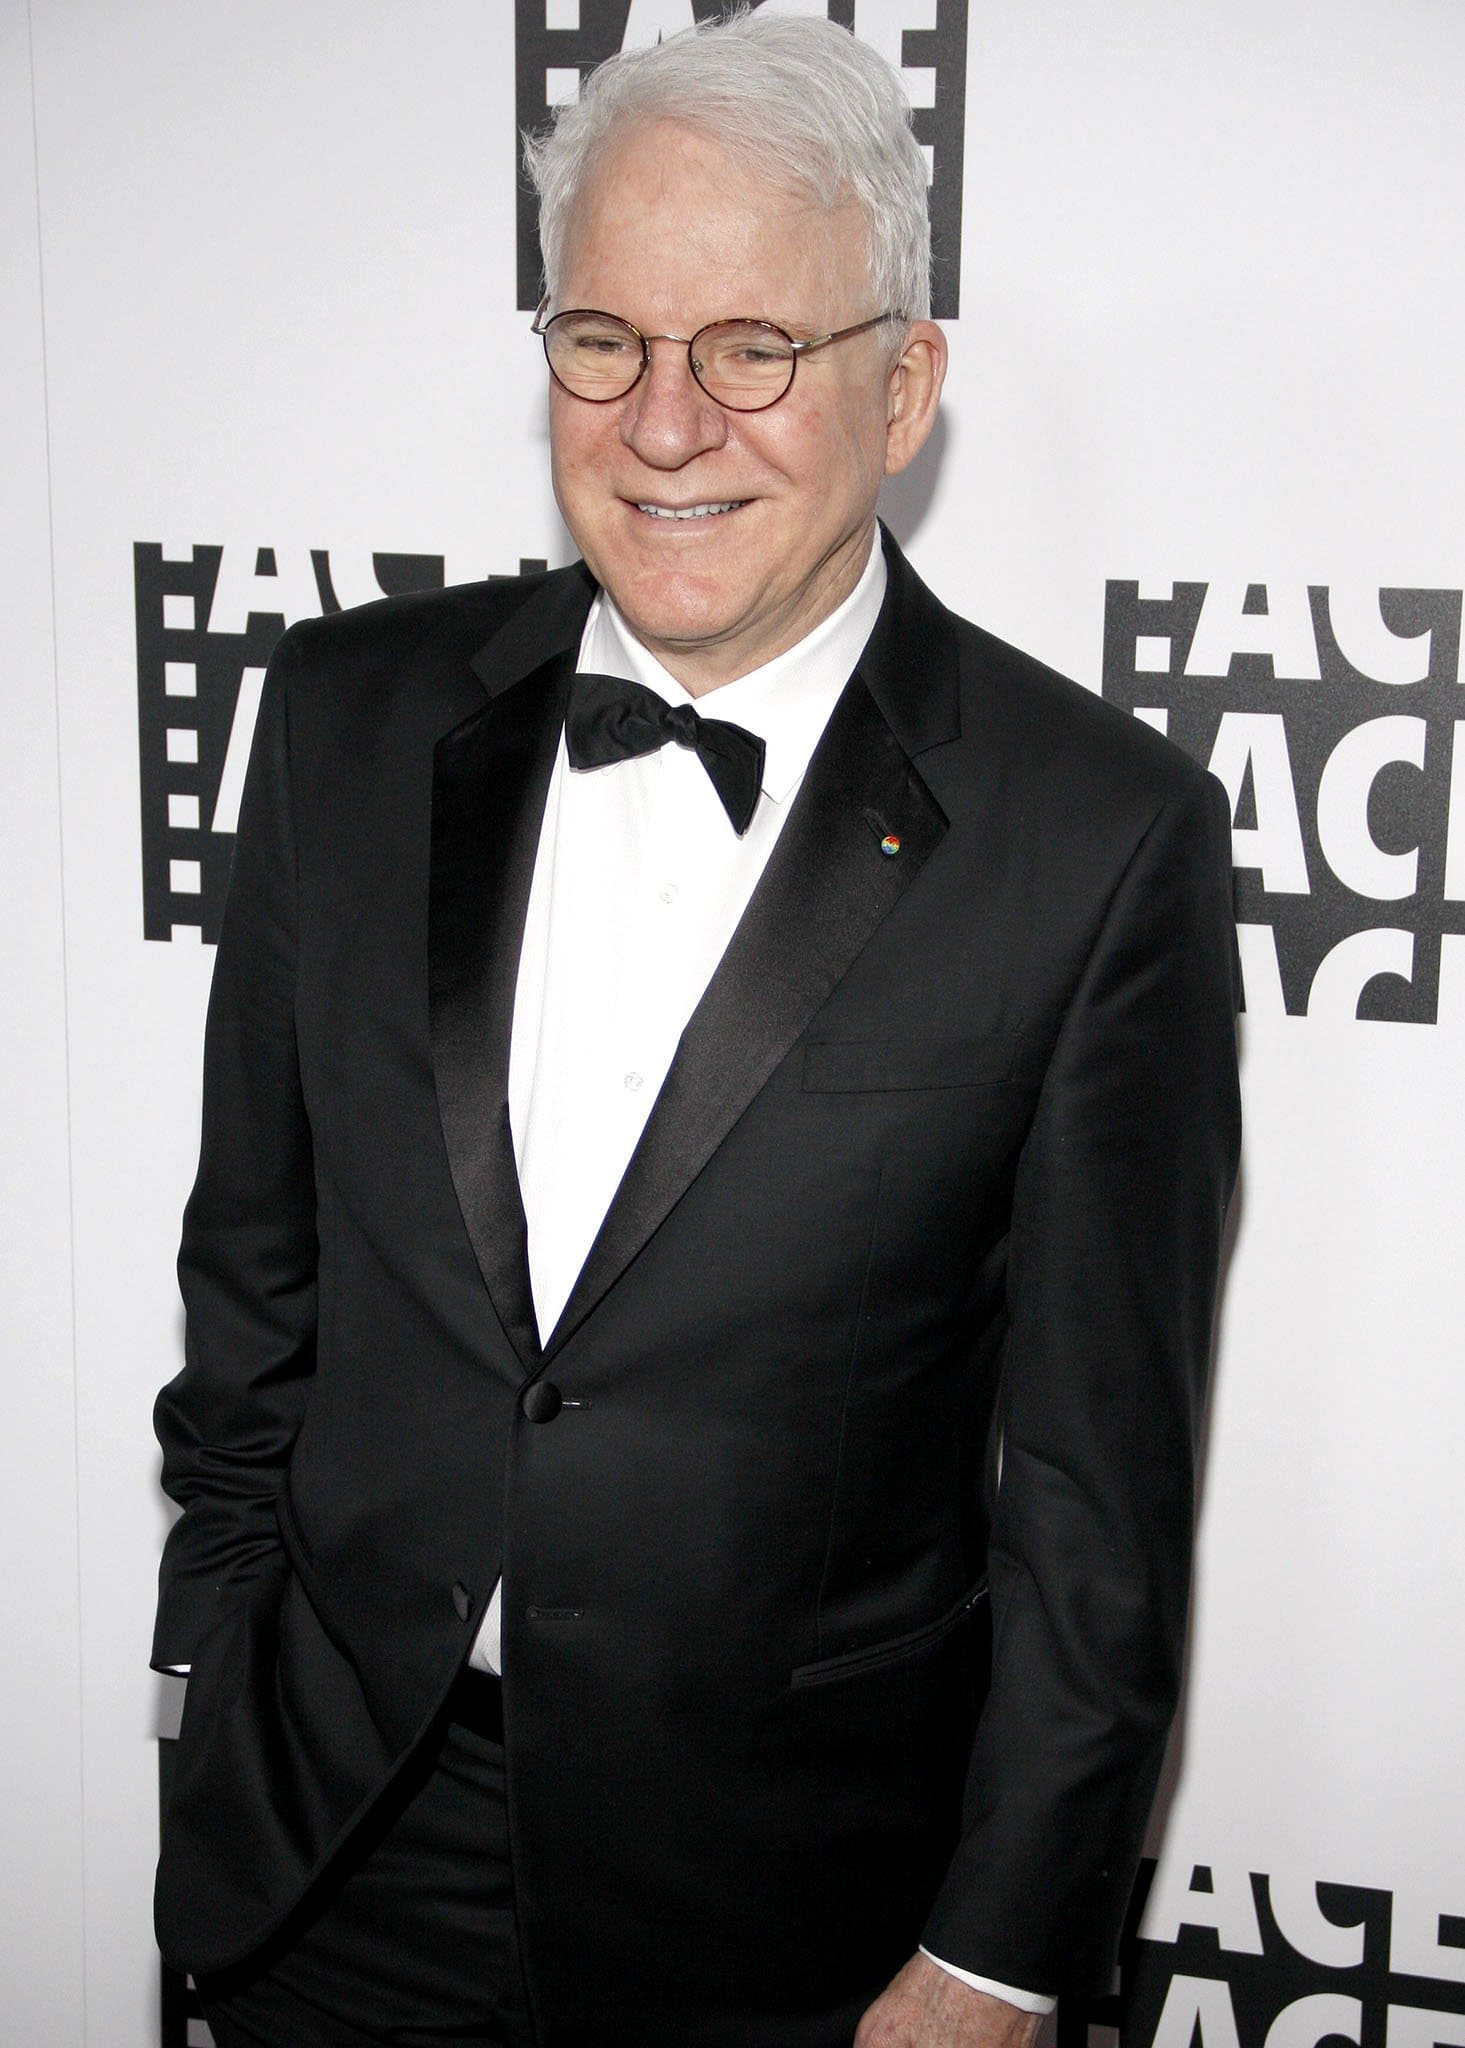 A member of the Five-Timers Club, Grammy-winning banjo player Steve Martin has appeared on twenty-seven Saturday Night Live shows and guest-hosted fifteen times